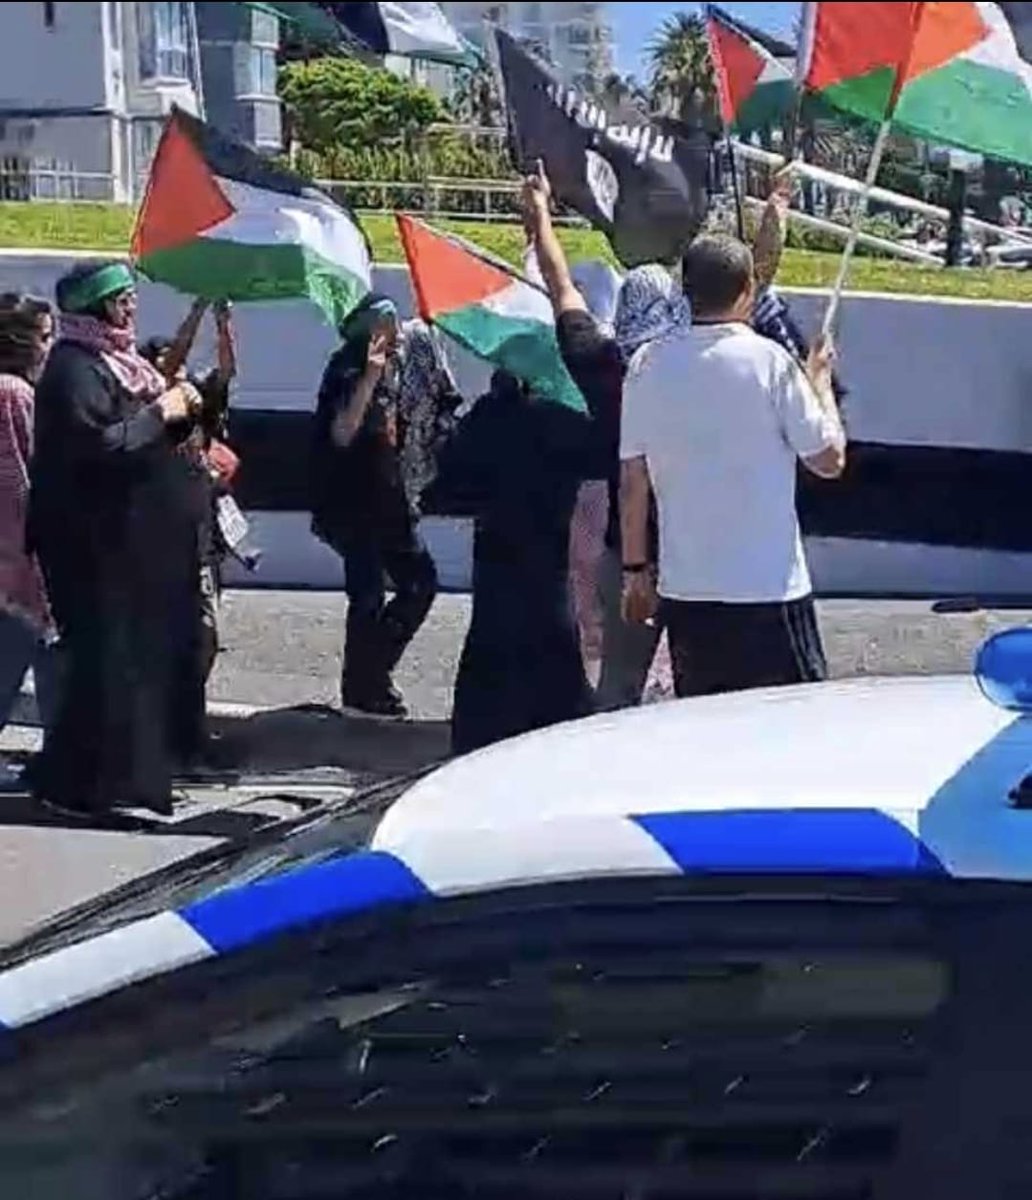 ISIS flags being flown as Hamas supporters illegally invade  multi faith pro-israel prayer rally in sea point. 

@SAfmnews @ewnupdates @times